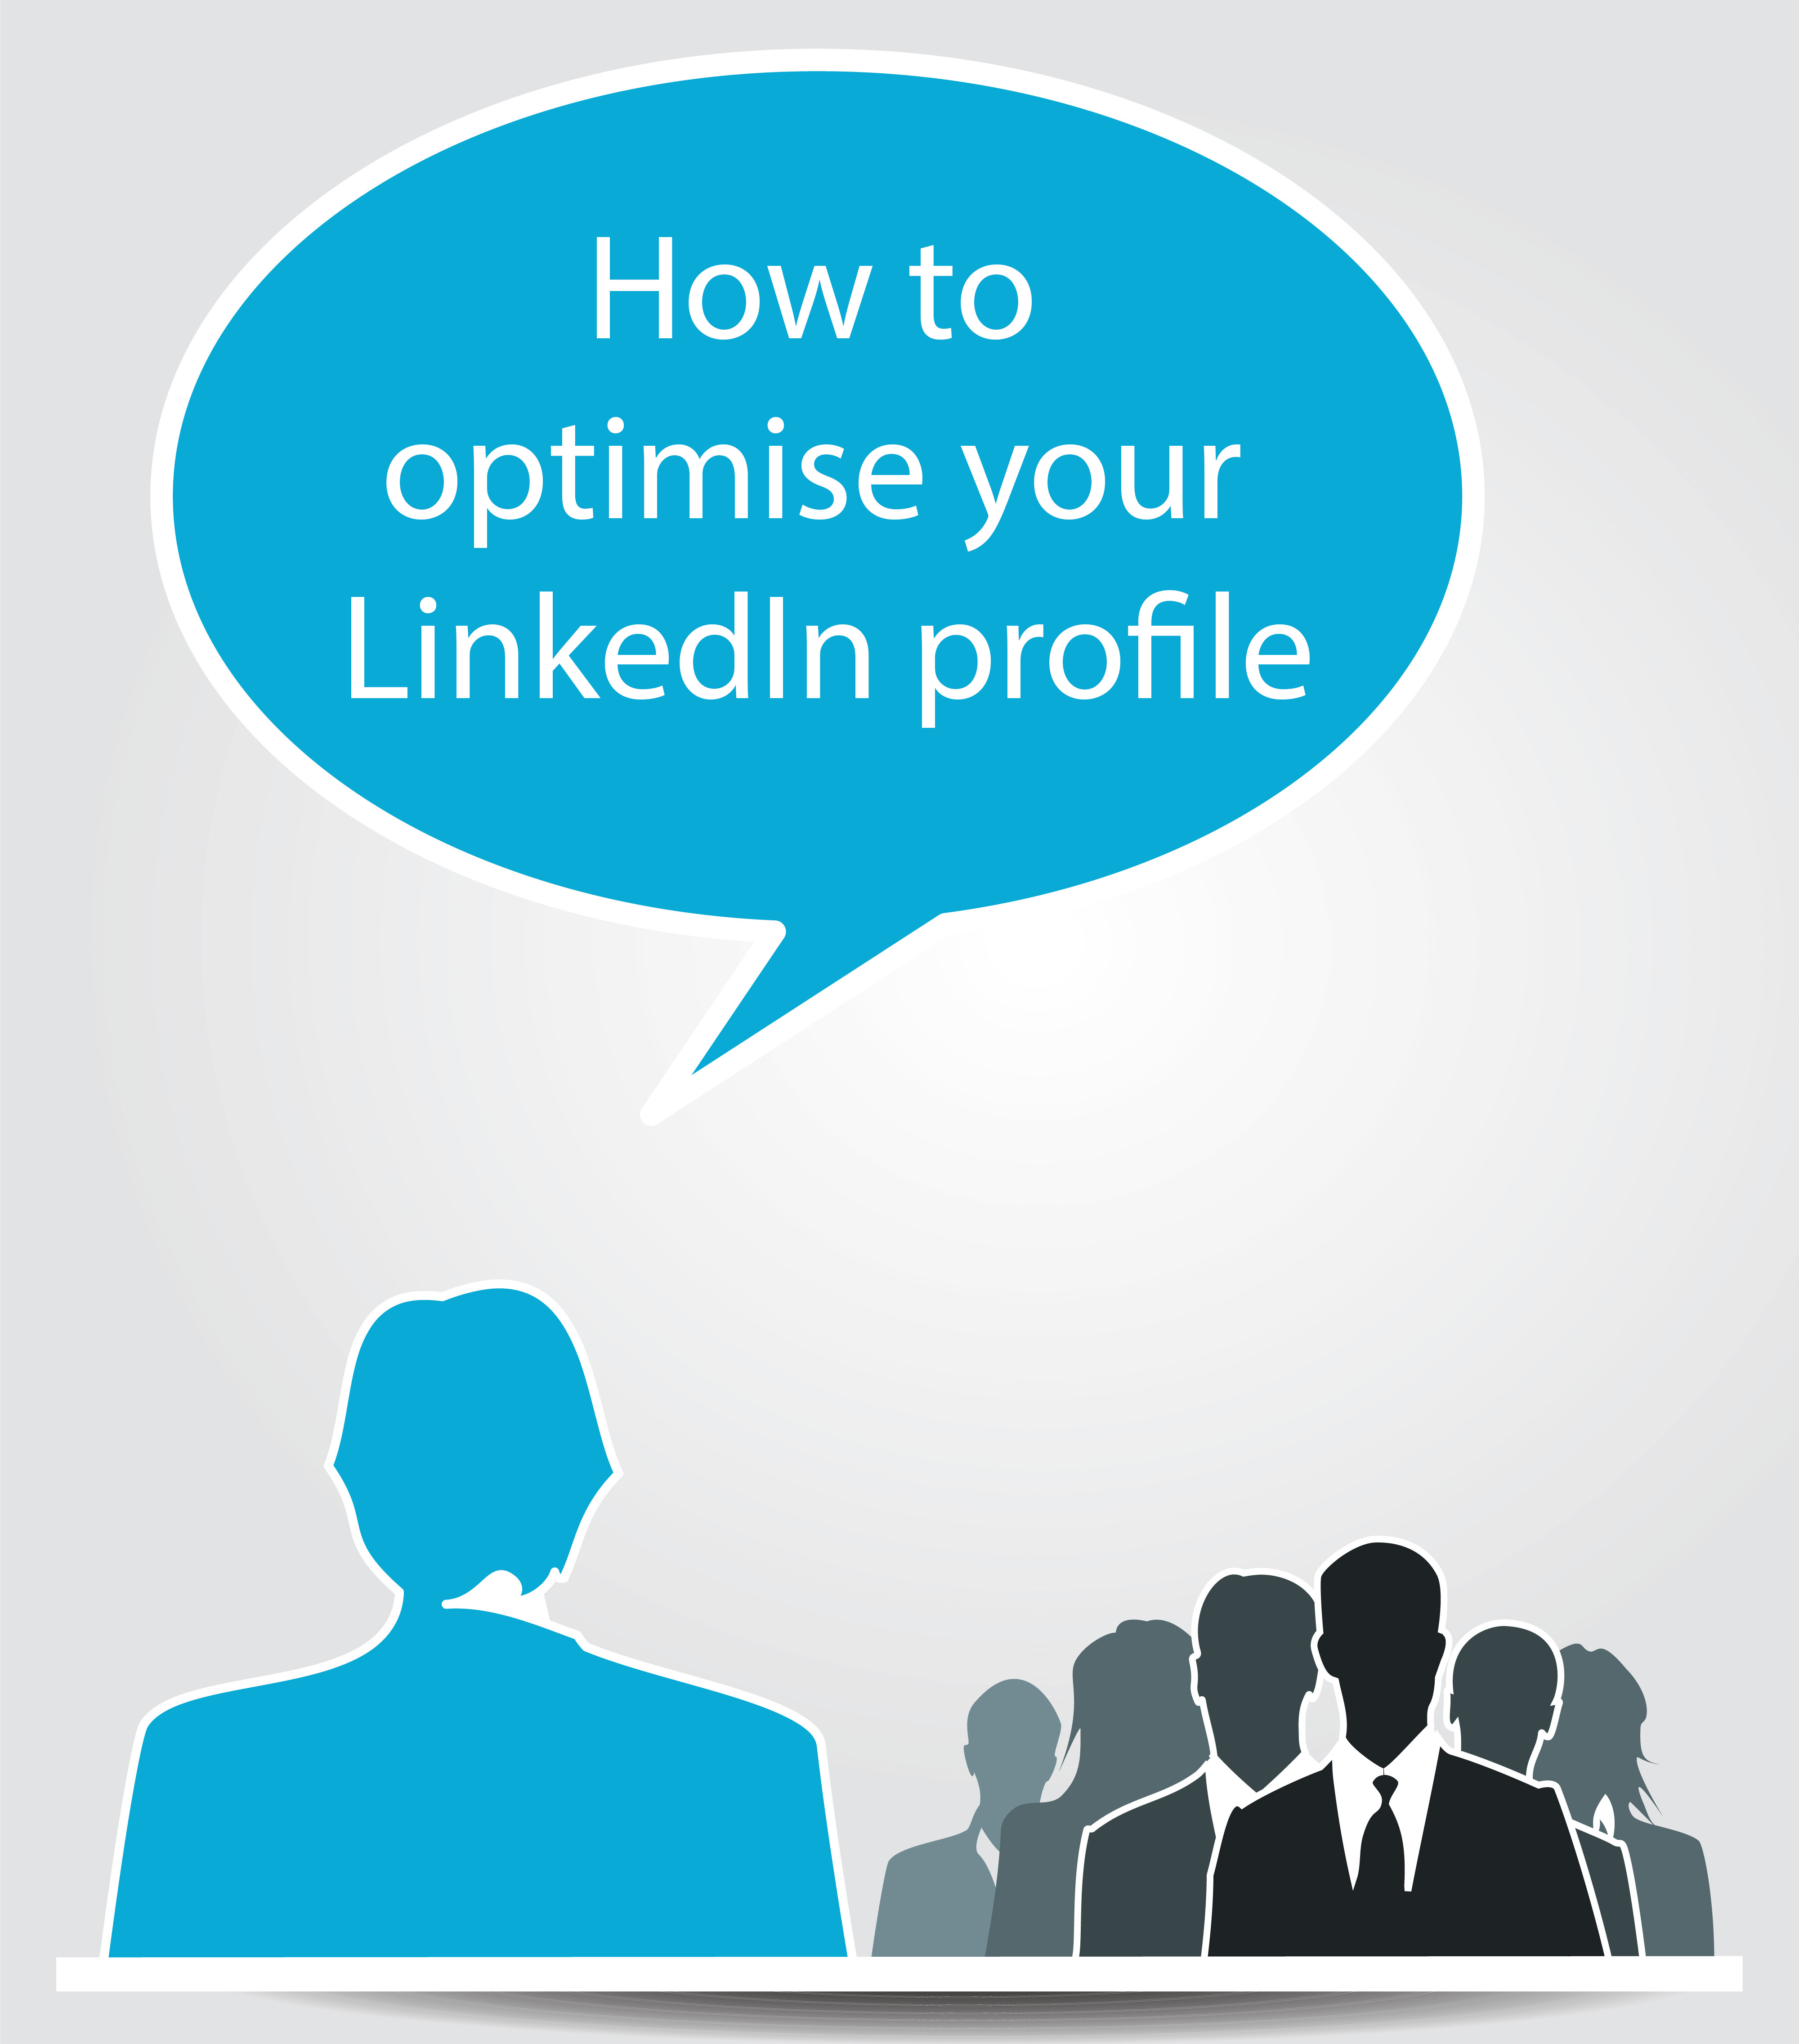 How to Optimise Your LinkedIn Profile - Pinnacle Blog